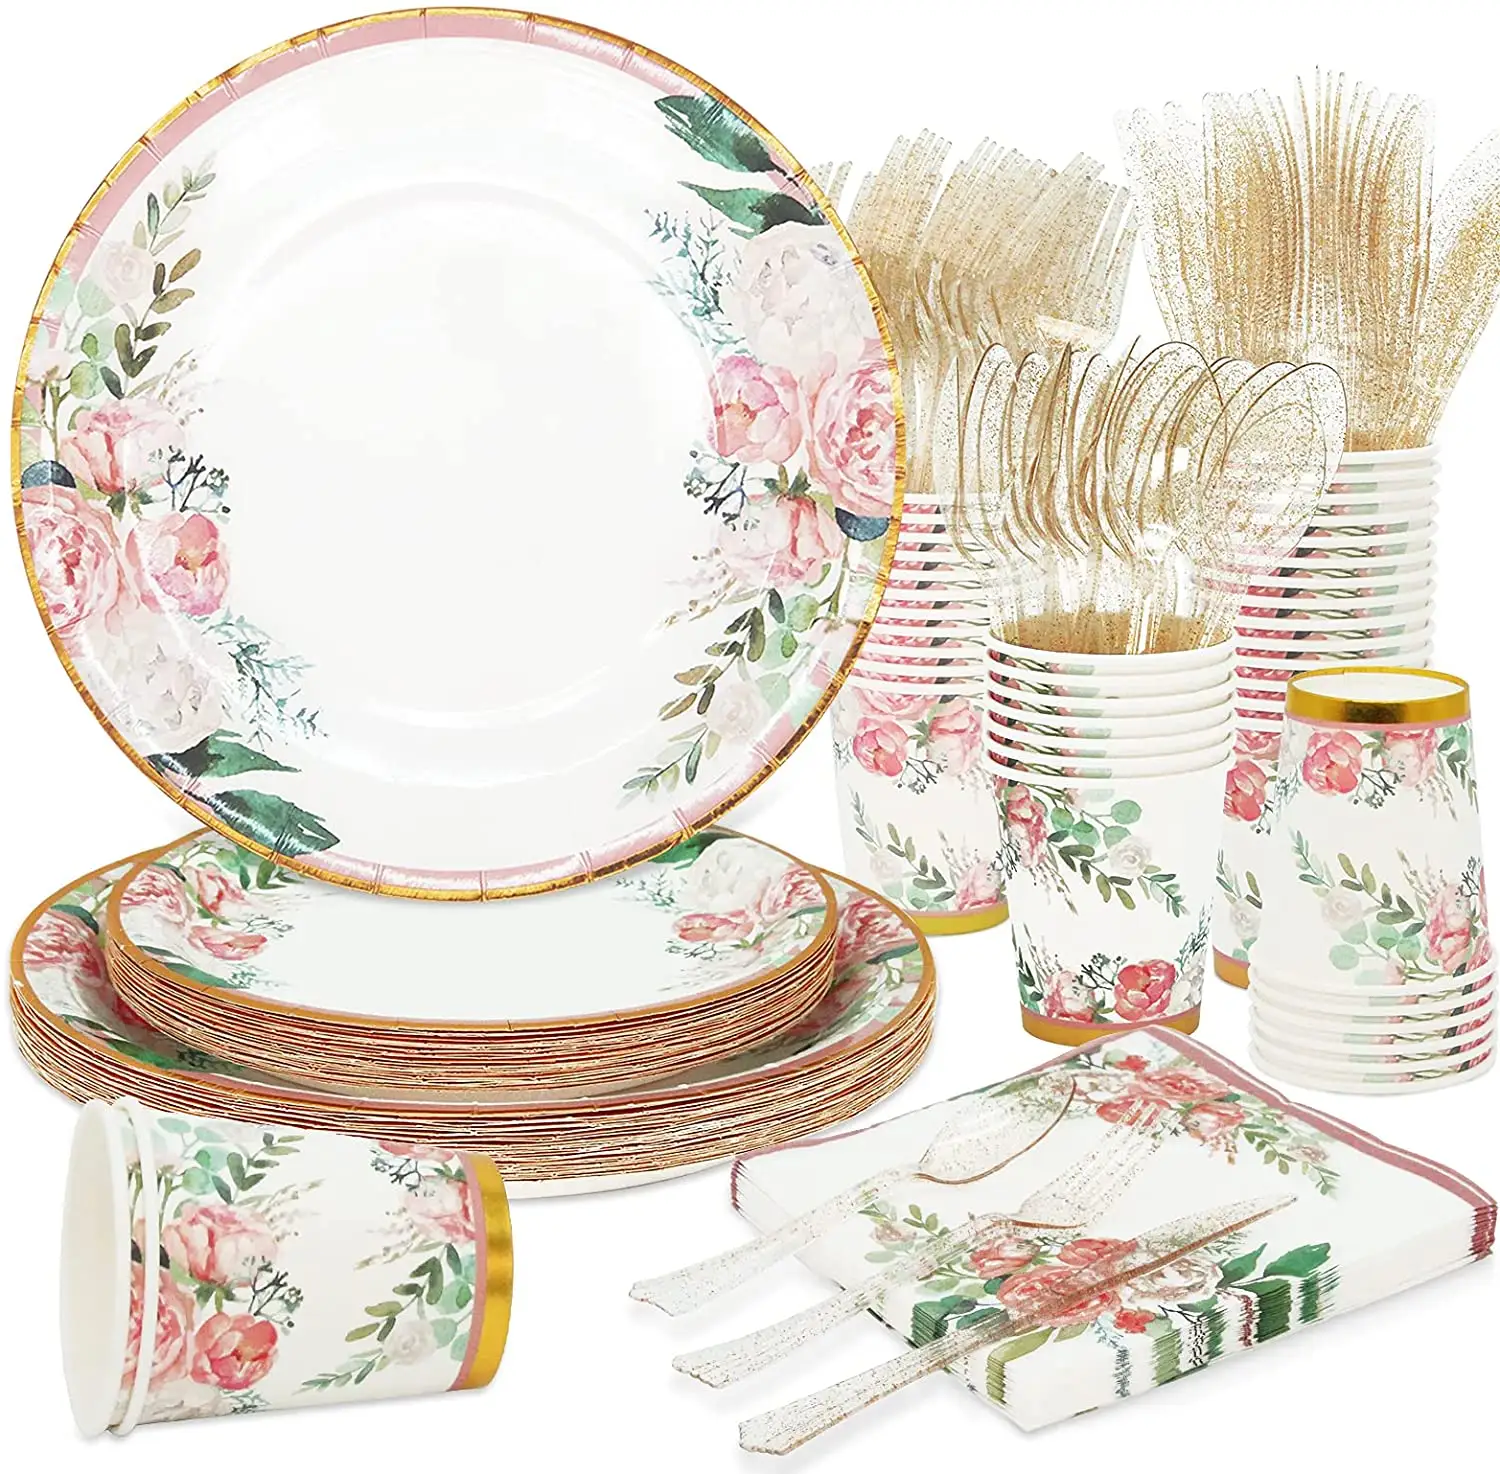 Cheap Luxury Party Supplies Wedding Disposable Tableware Sets Bridal Shower Floral Paper Plates